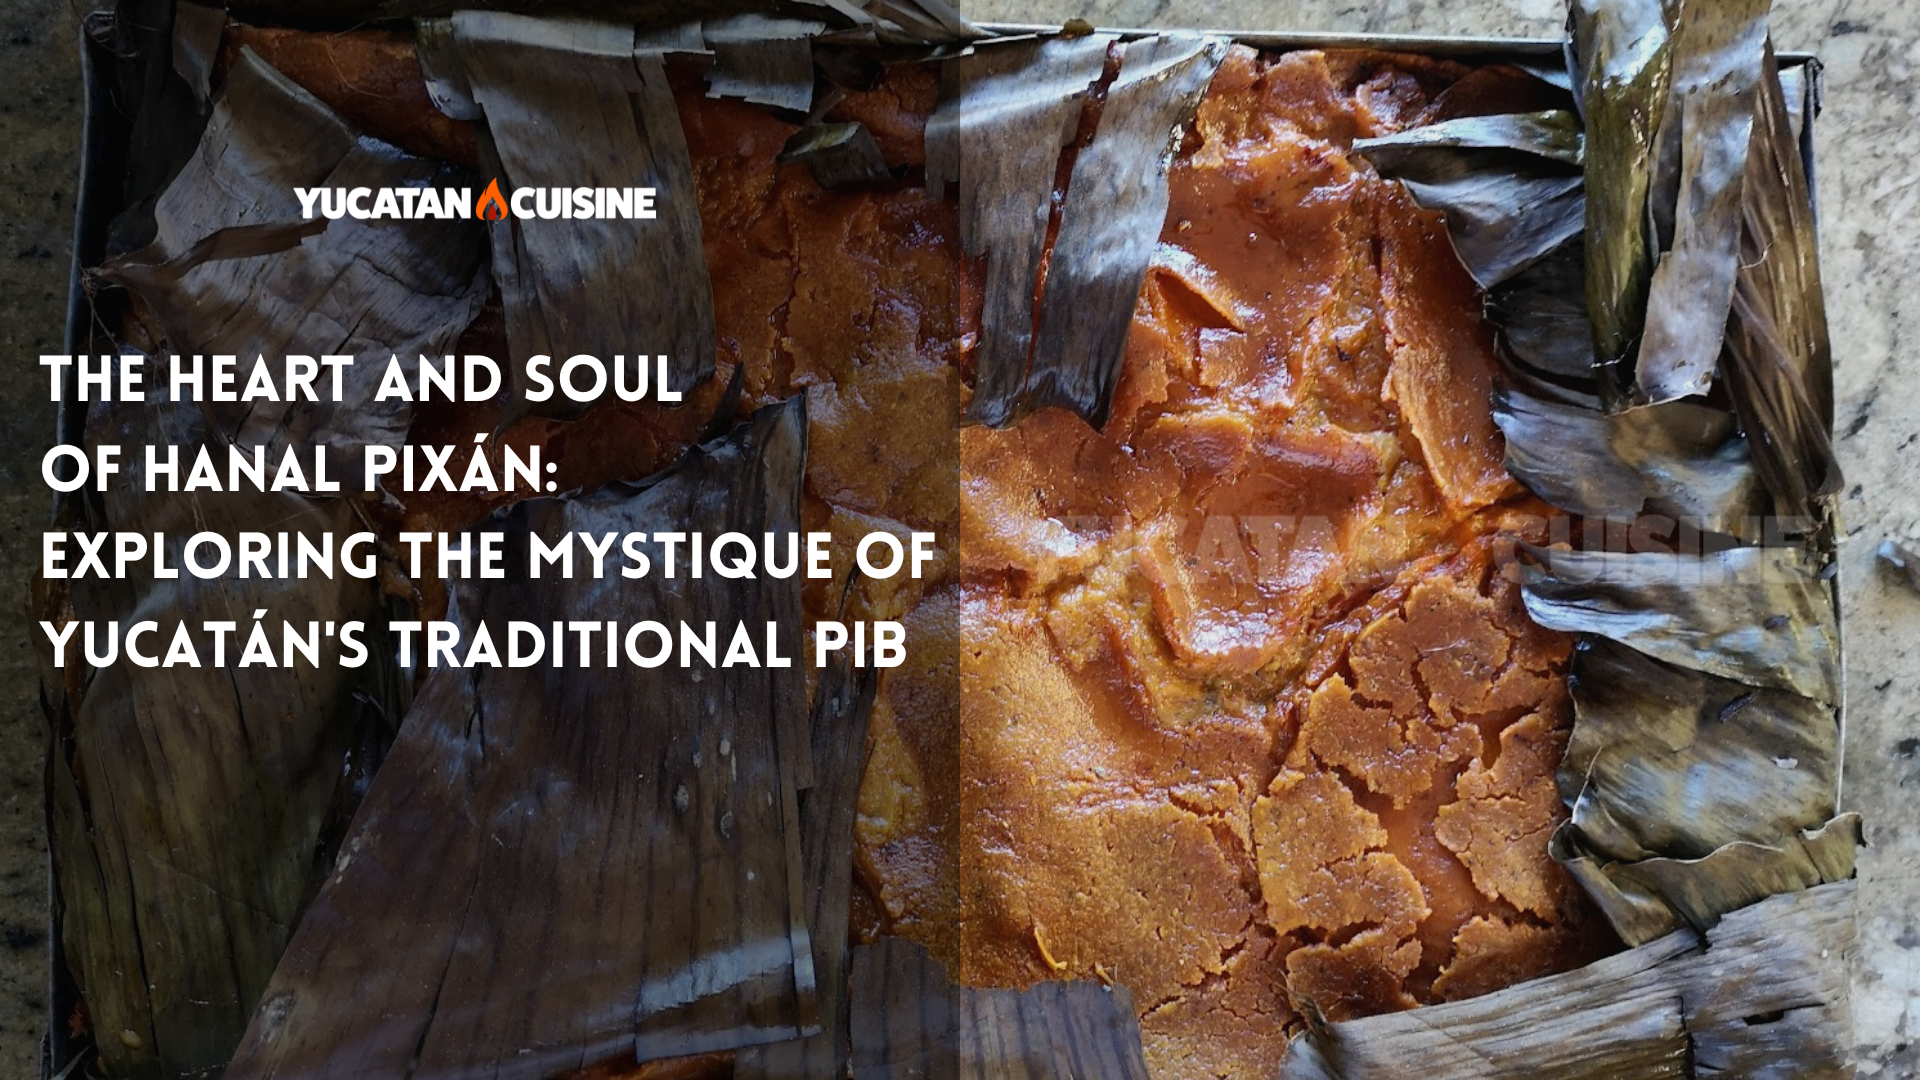 The Heart and Soul of Hanal Pixán: Exploring the Mystique of Yucatán’s Traditional Pib